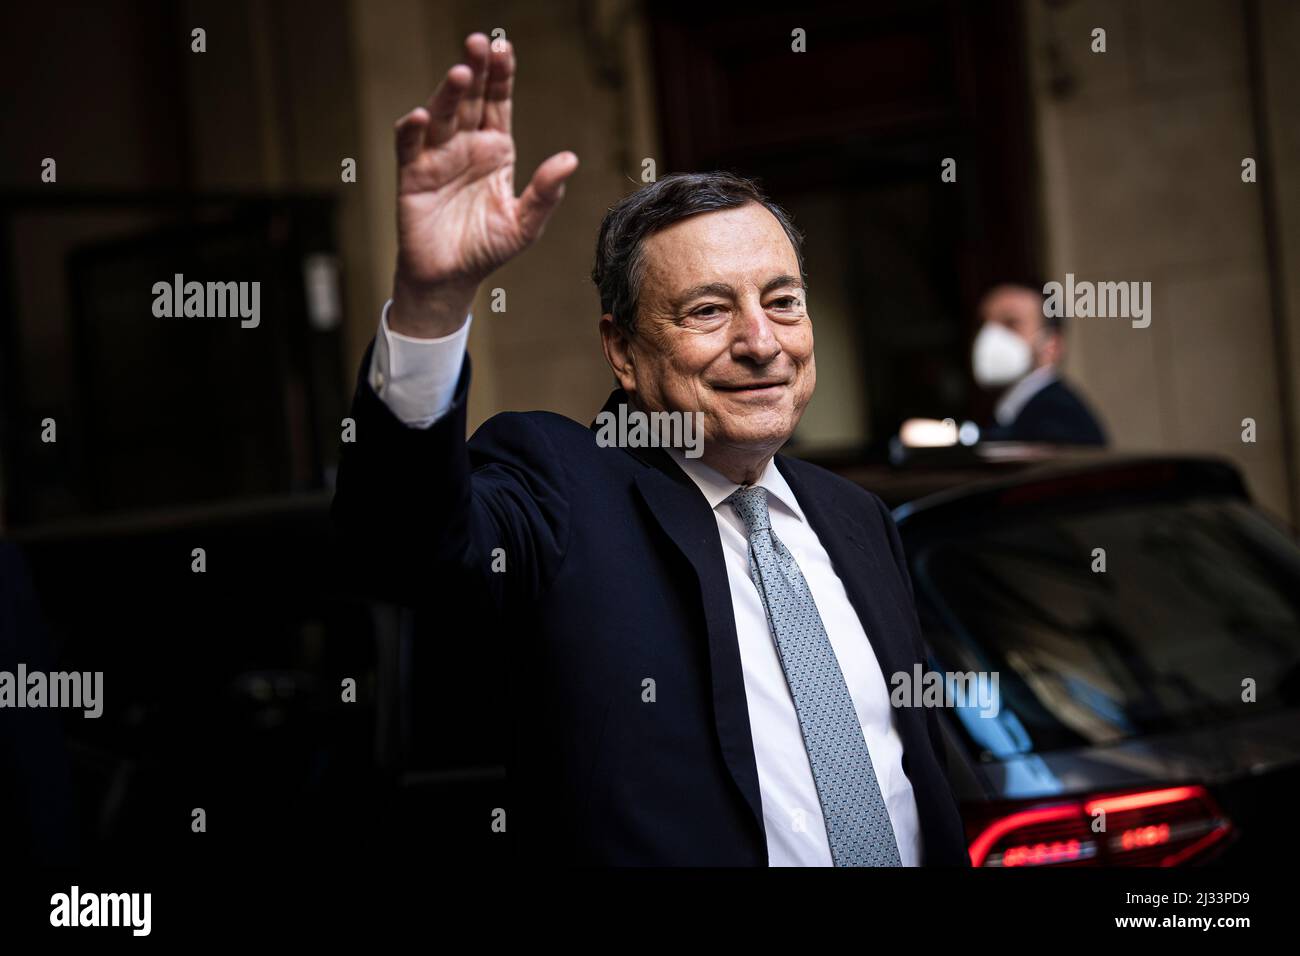 Turin, Italy. 05 April 2022. Prime Minister of Italy Mario Draghi gestures during his visit to Turin where he signed the so called 'Patto per Torino'. The municipality of Turin will receive from the Italian government over one billion euros over 20 years. Credit: Nicolò Campo/Alamy Live News Stock Photo